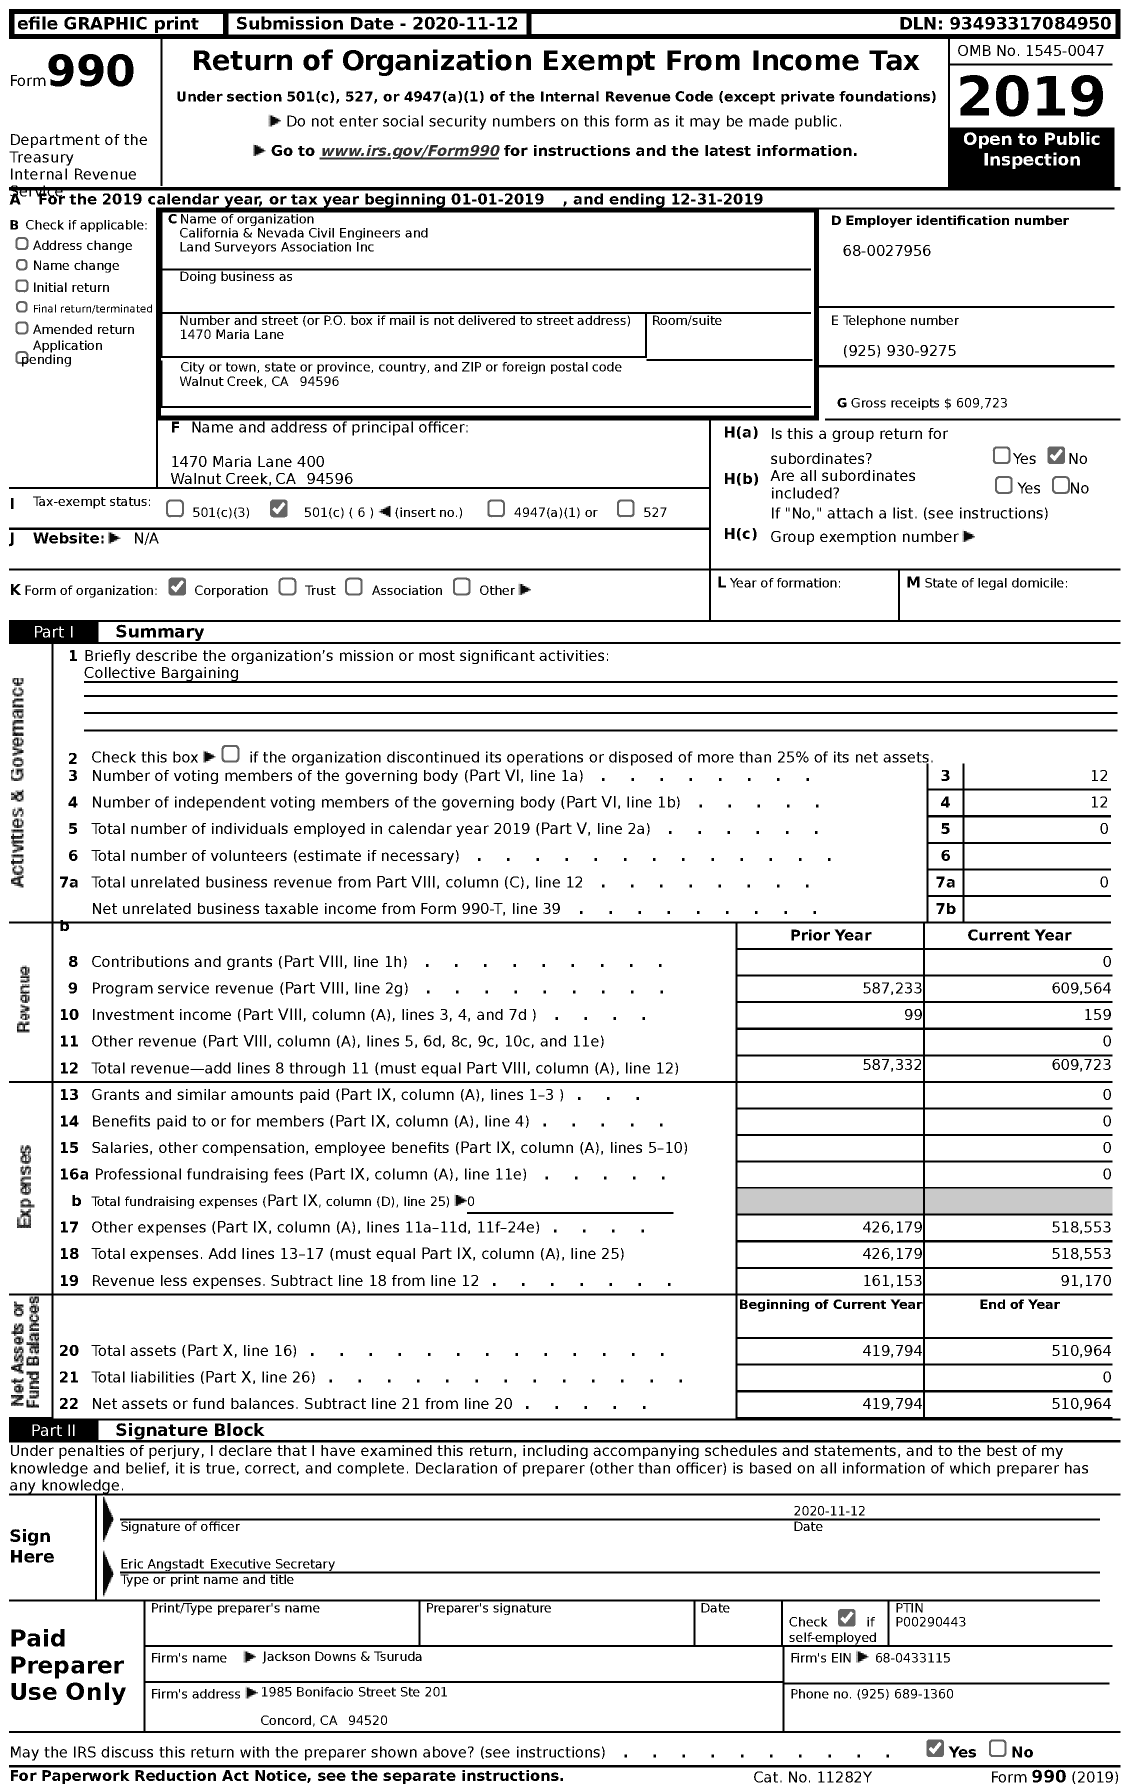 Image of first page of 2019 Form 990 for California and Nevada Civil Engineers and Land Surveyors Association